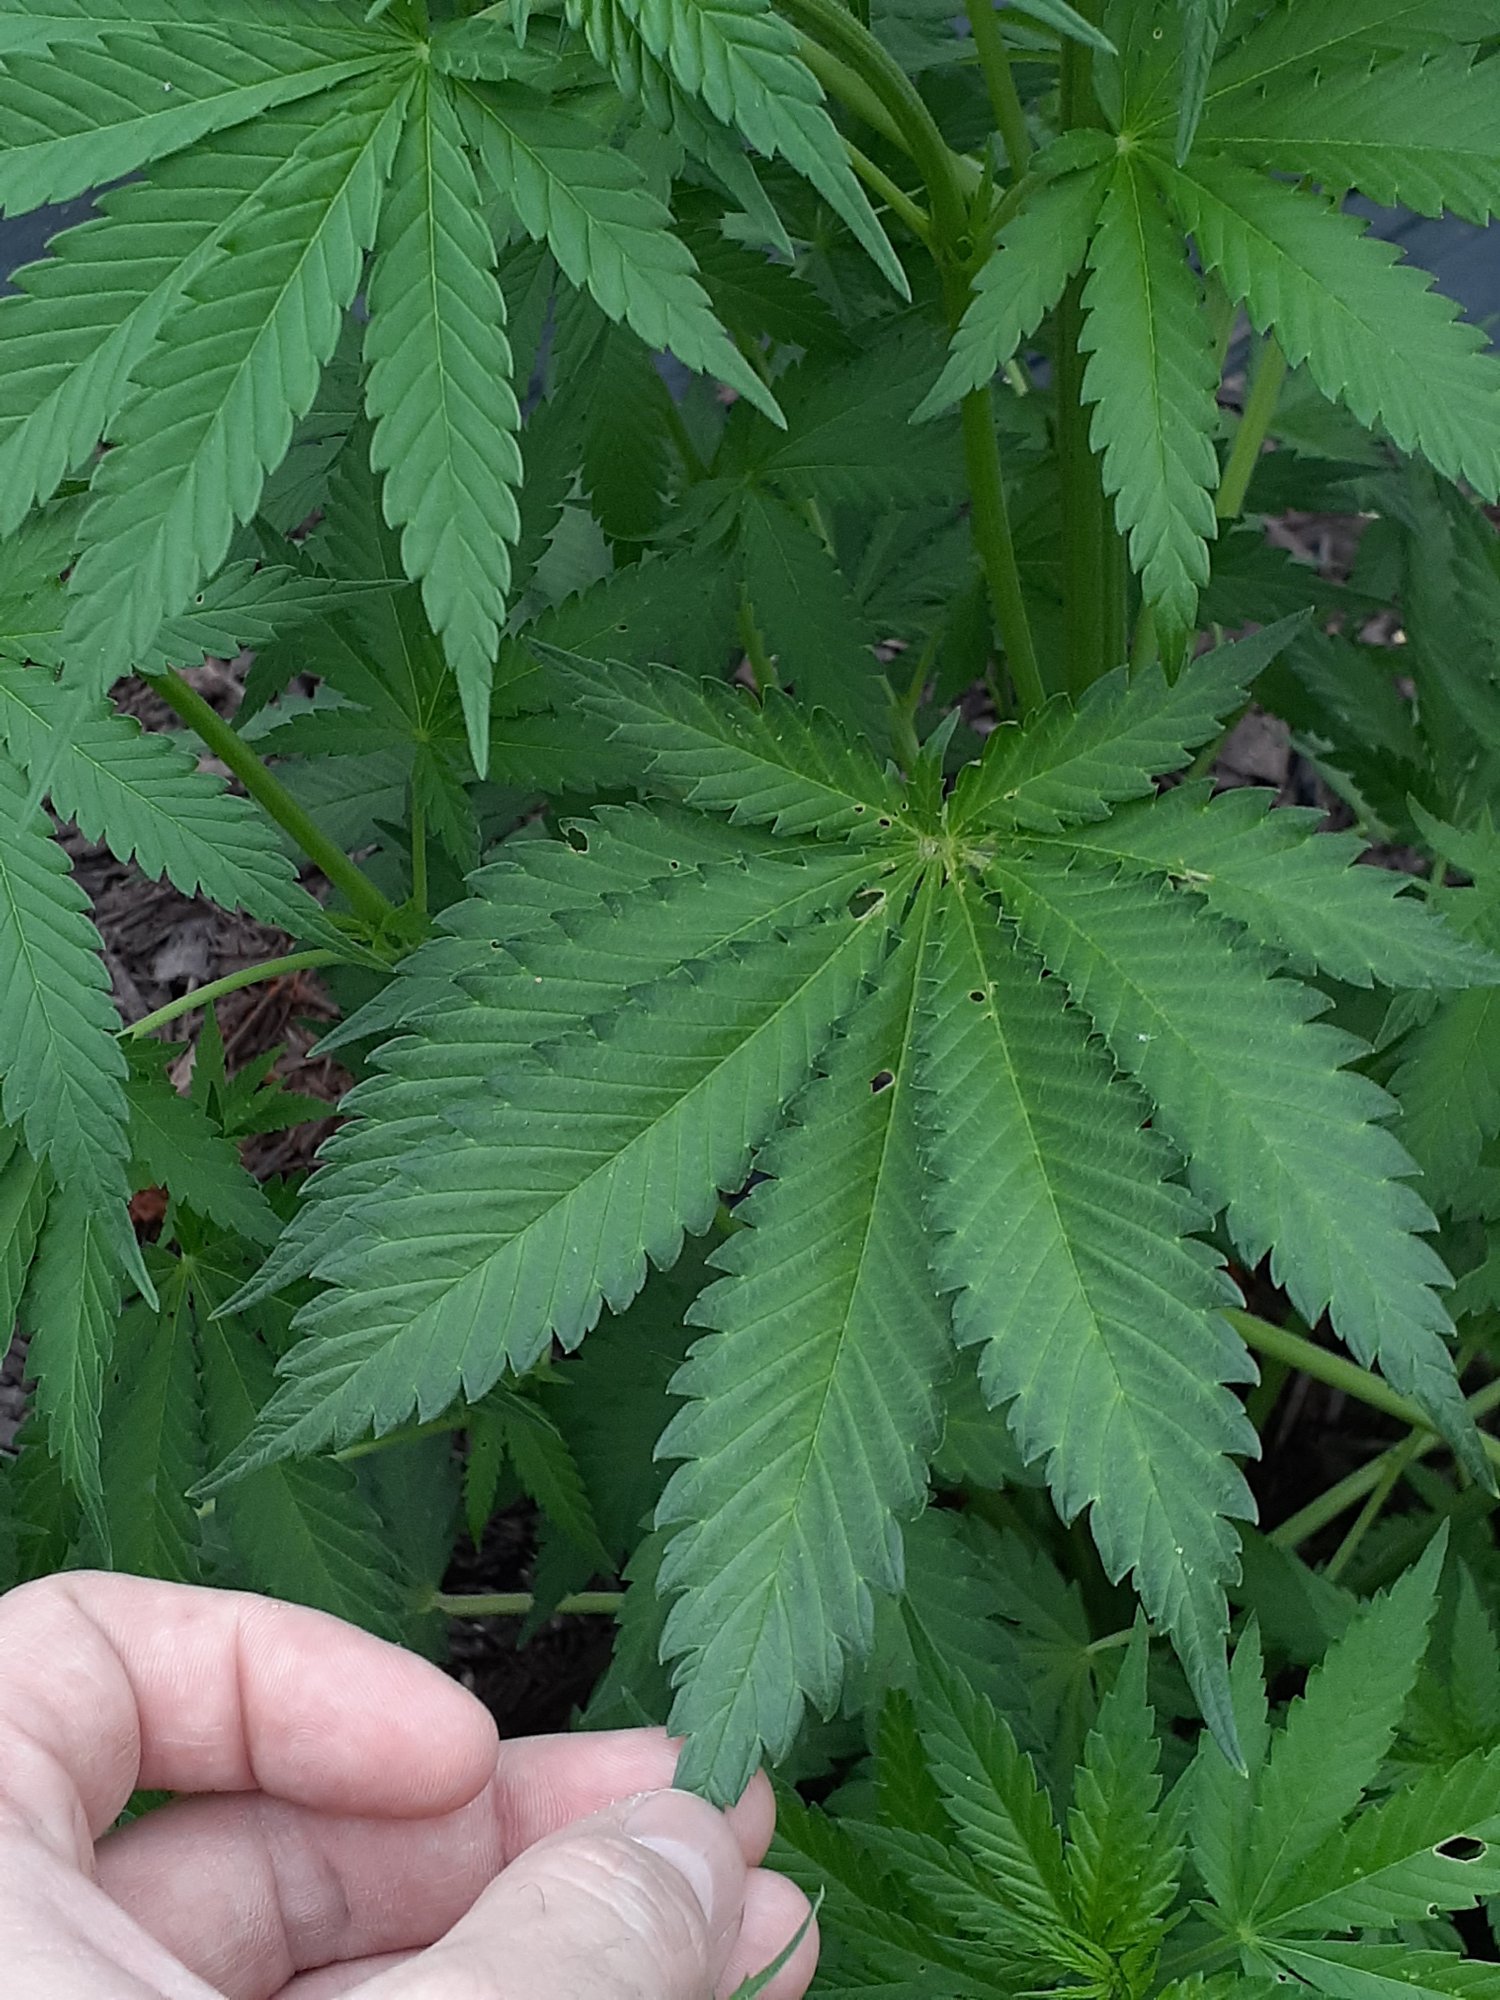 Hungry ph issues or heatpest stress outdoor 2